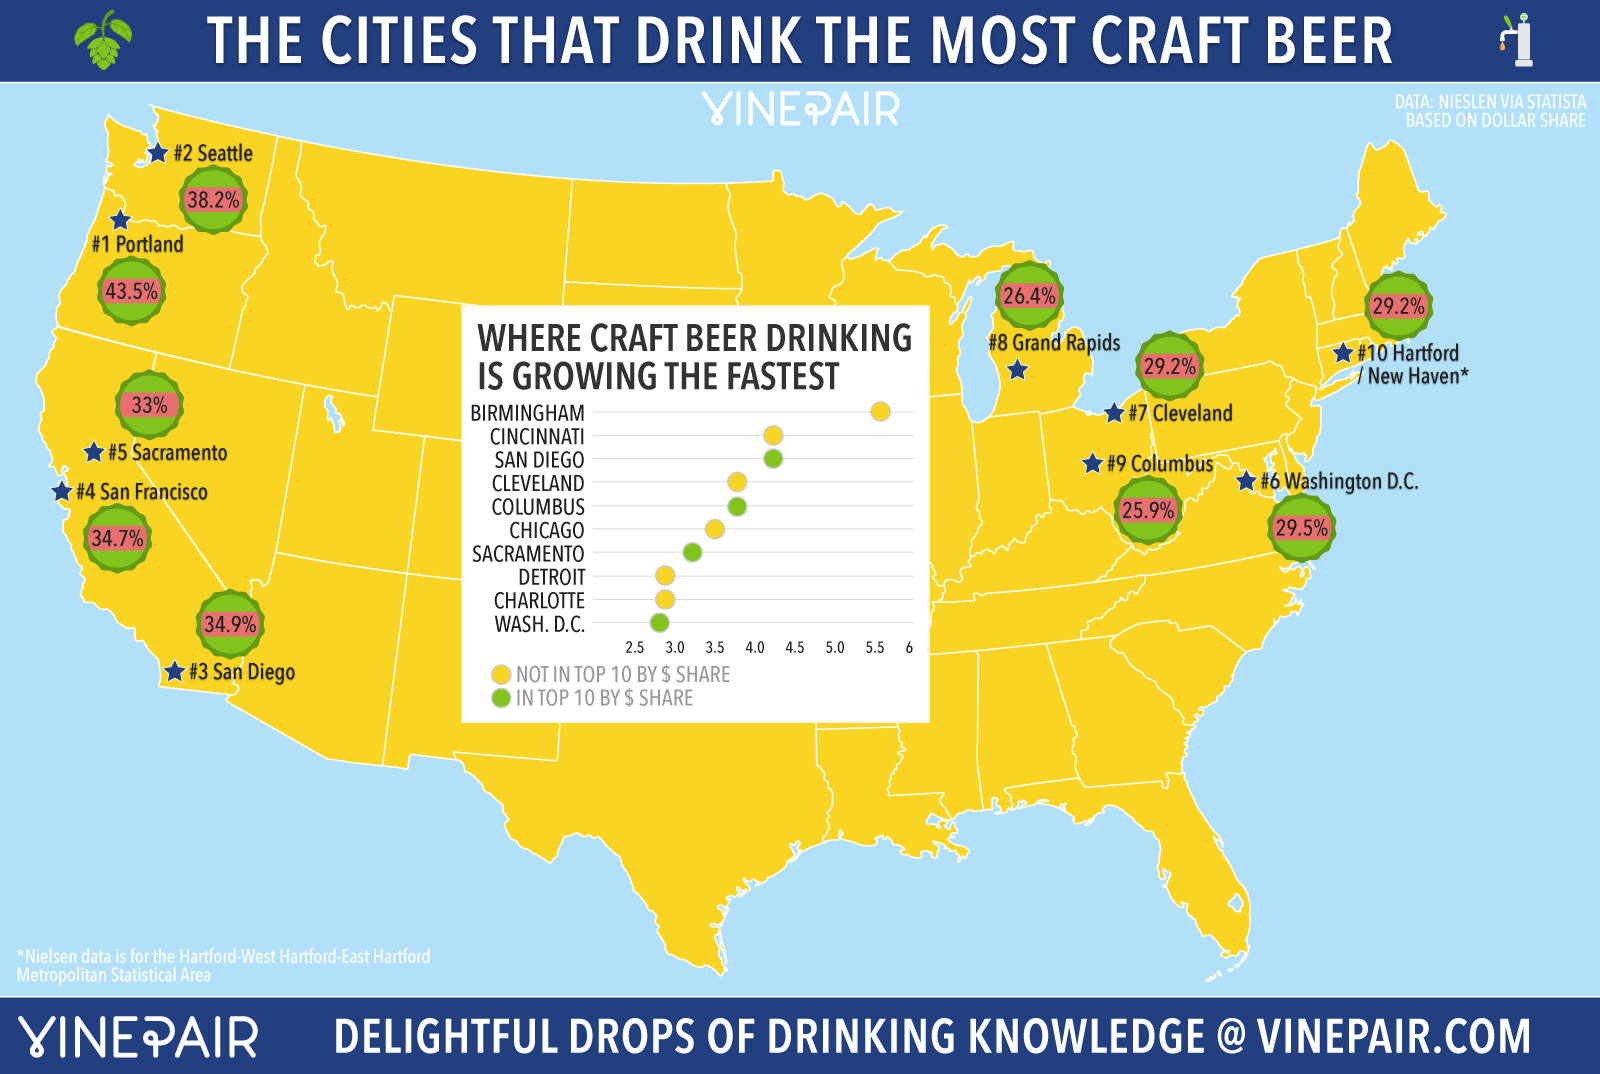 The American Cities That Drink The Most Craft Beer